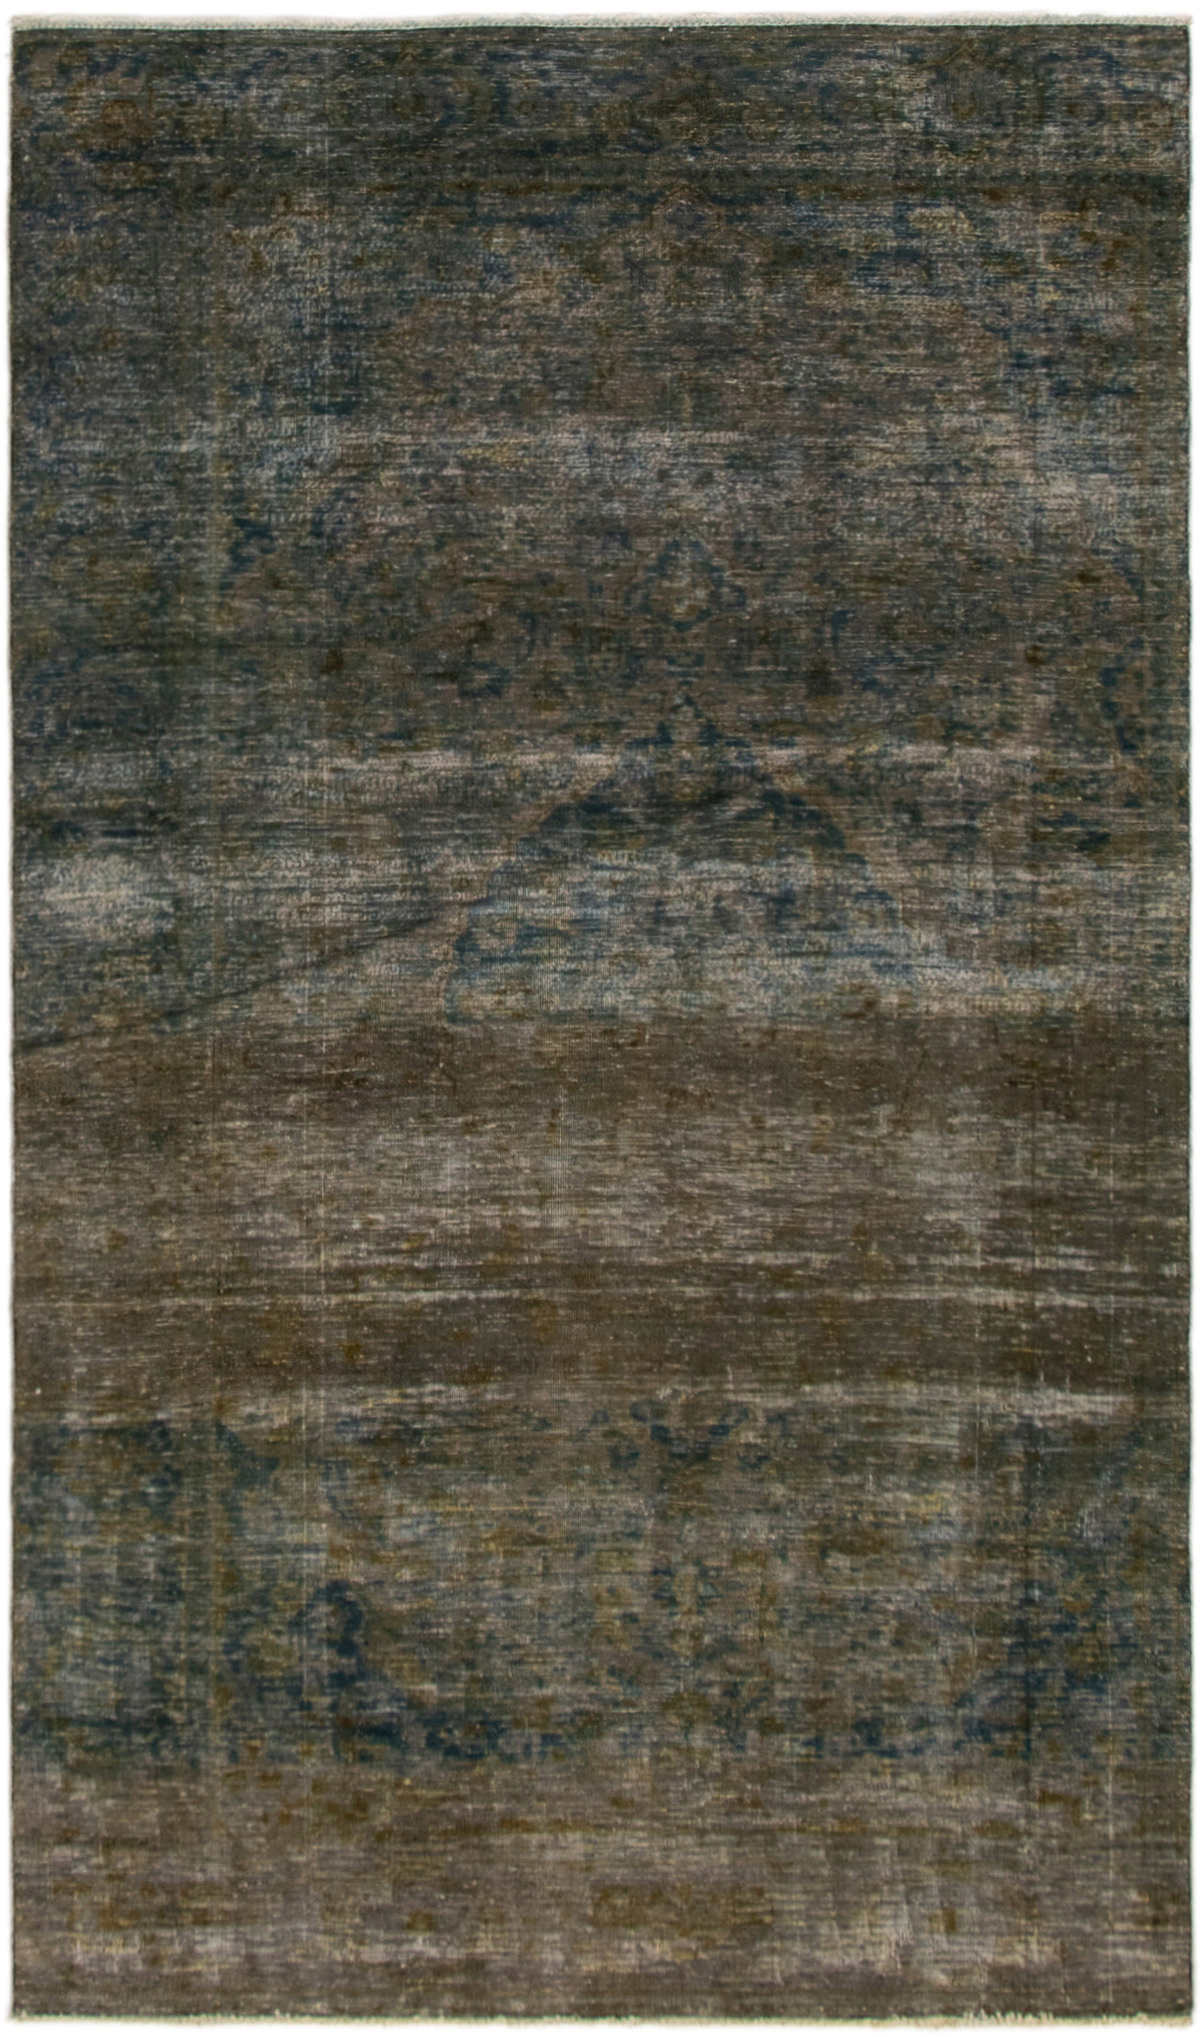 Hand-knotted Color Transition Brown, Dark Navy Wool Rug 5'7" x 9'7" Size: 5'7" x 9'7"  